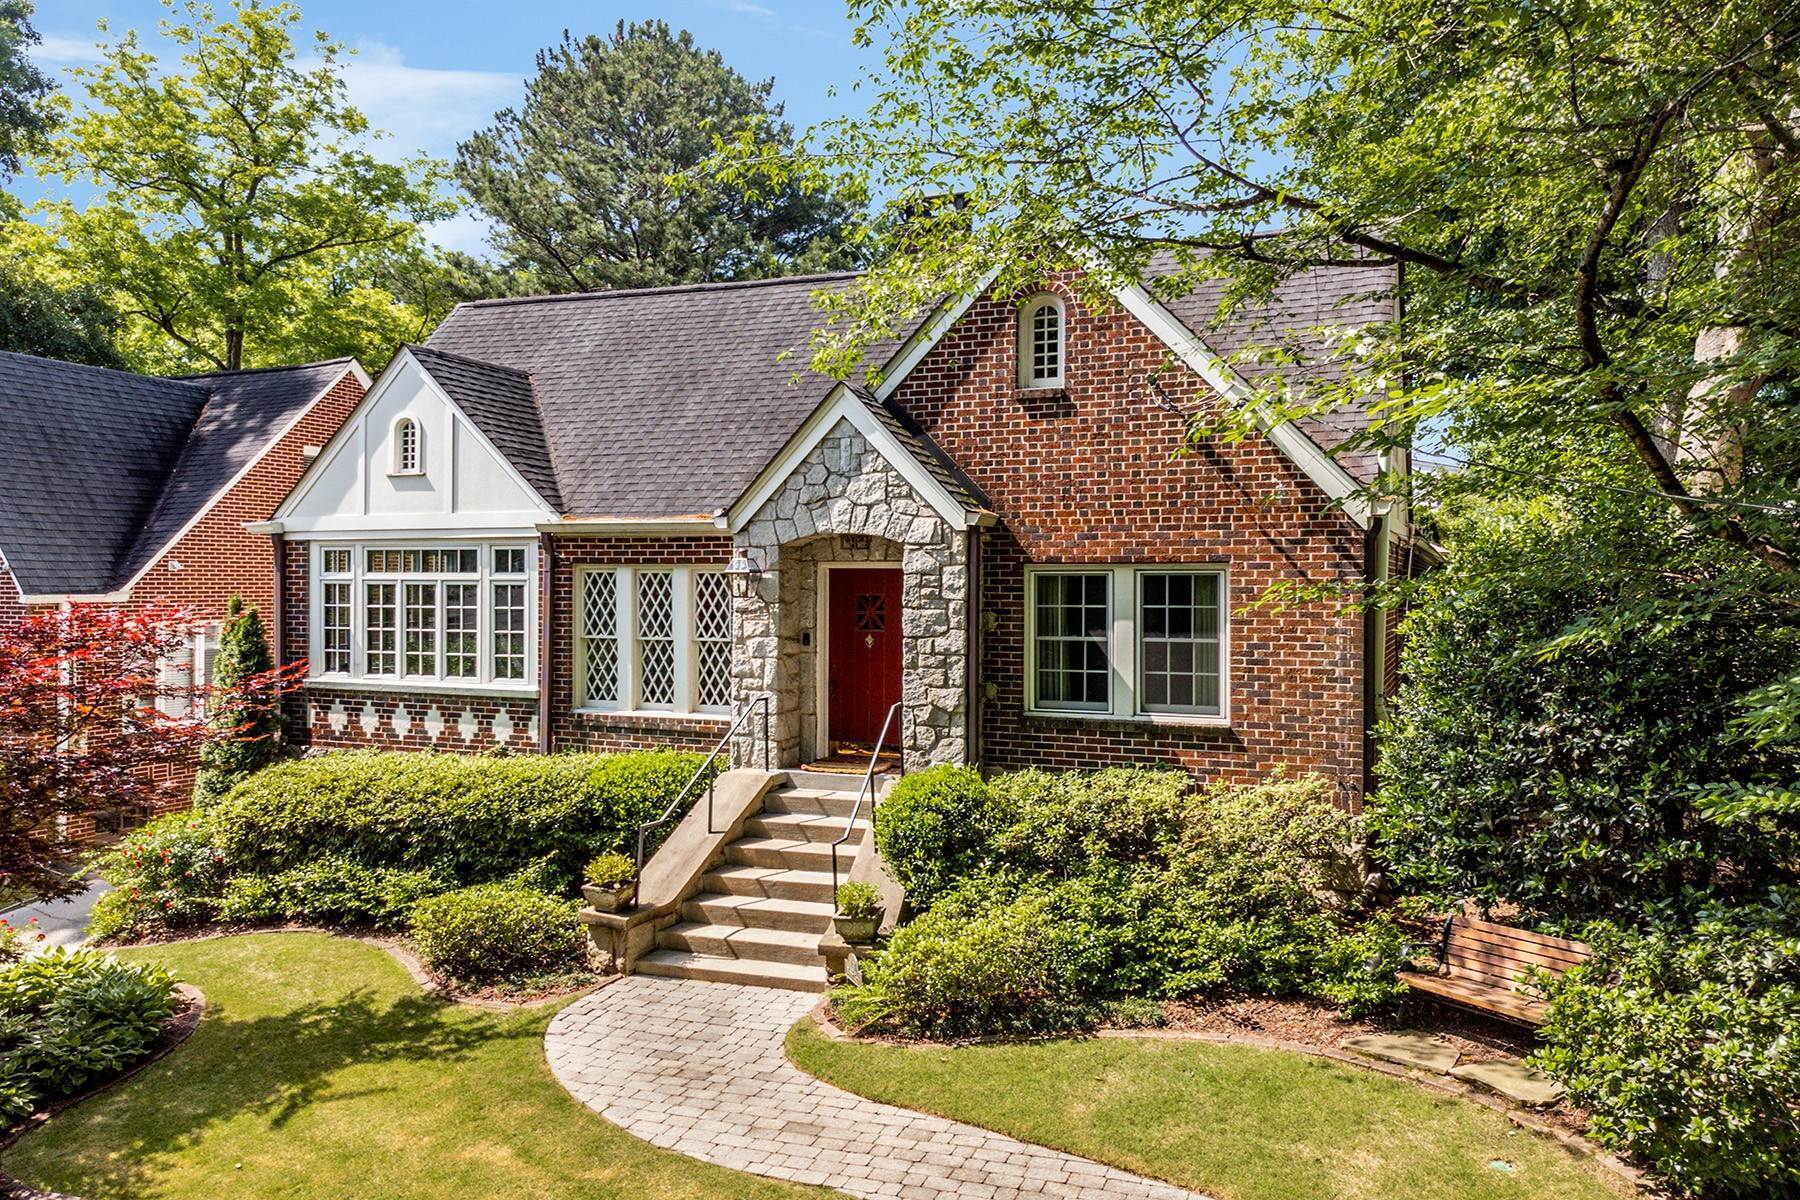 Single Family Homes for Sale at Charmingly Updated Morningside Tudor Offers Thoughtful Finishes And Curb Appeal 1131 Reeder Circle NE Atlanta, Georgia 30306 United States